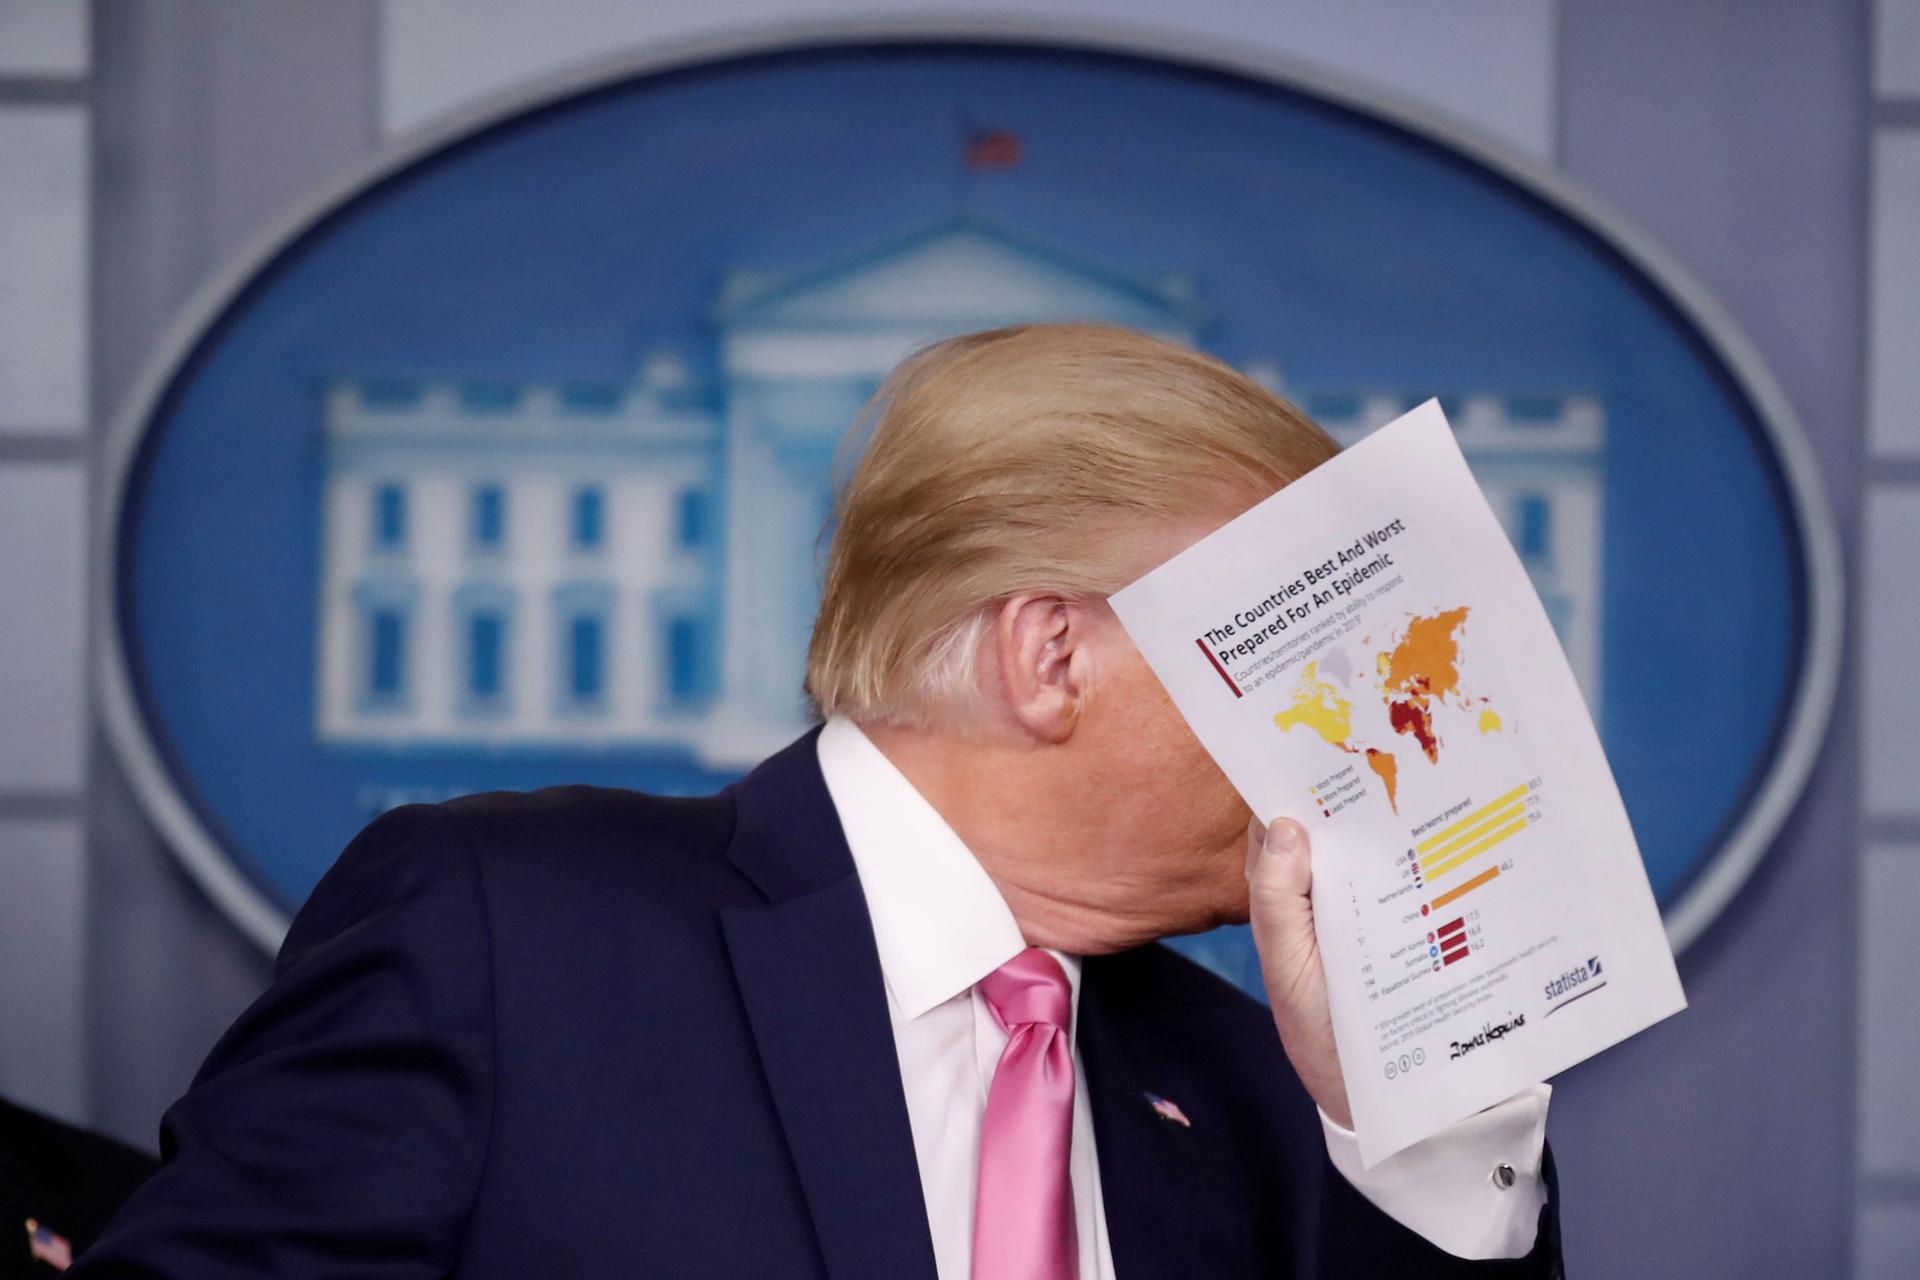 US President Donald Trump is shown hiolding a paper in his hand and covering his face.